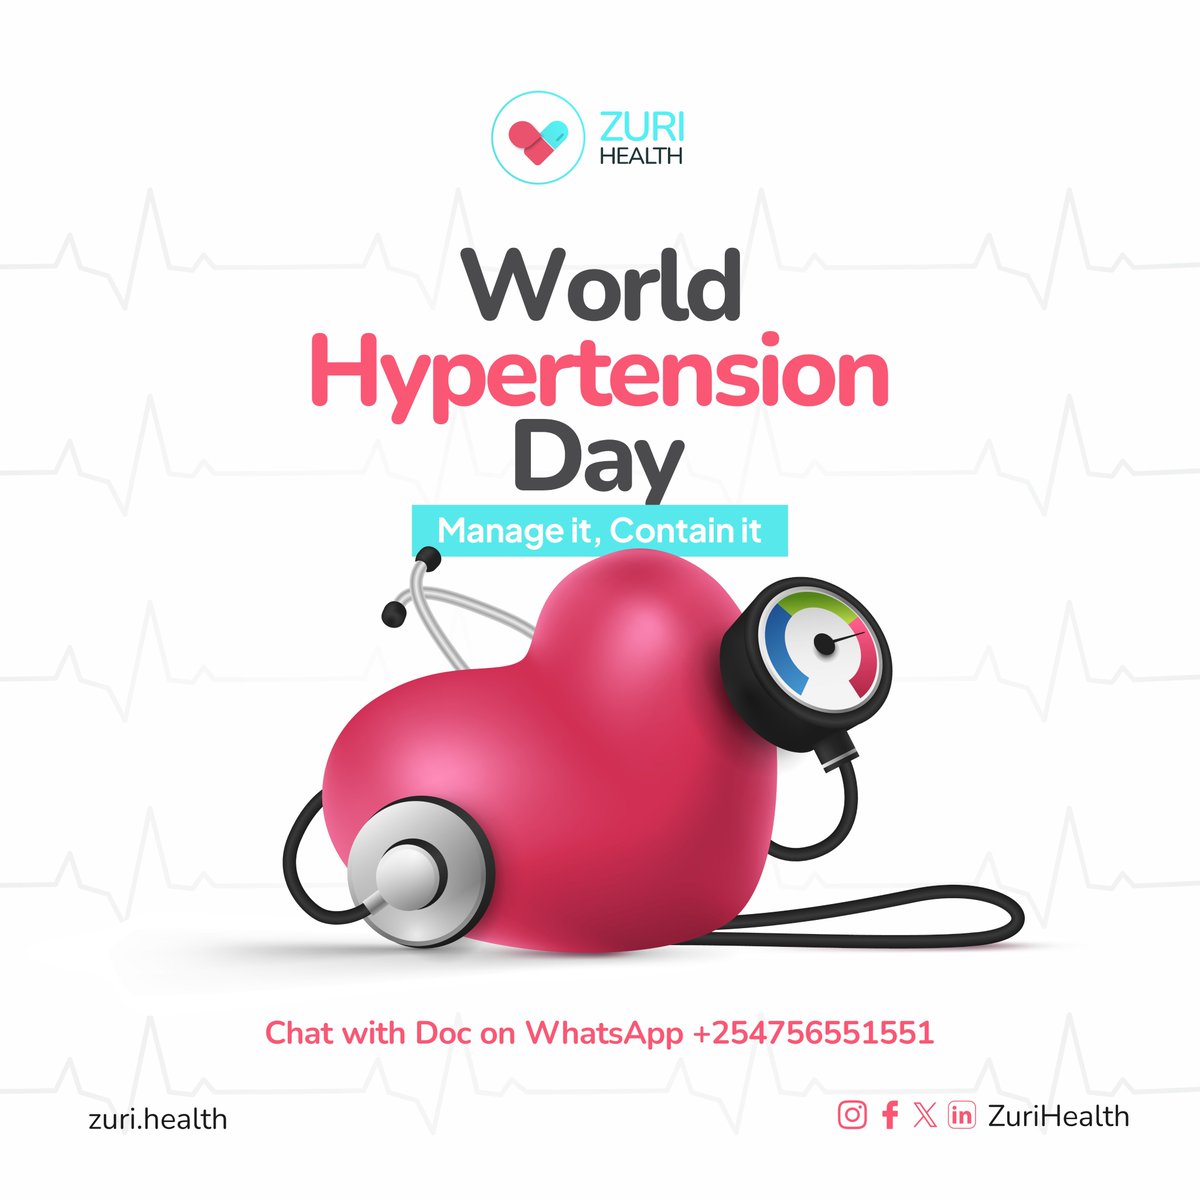 On this World Hypertension Day, let’s take a moment to acknowledge the importance of managing and containing high blood pressure. 

Hypertension, often a silent threat, can lead to serious health complications if left unchecked.

At Zuri Health, we are committed to supporting